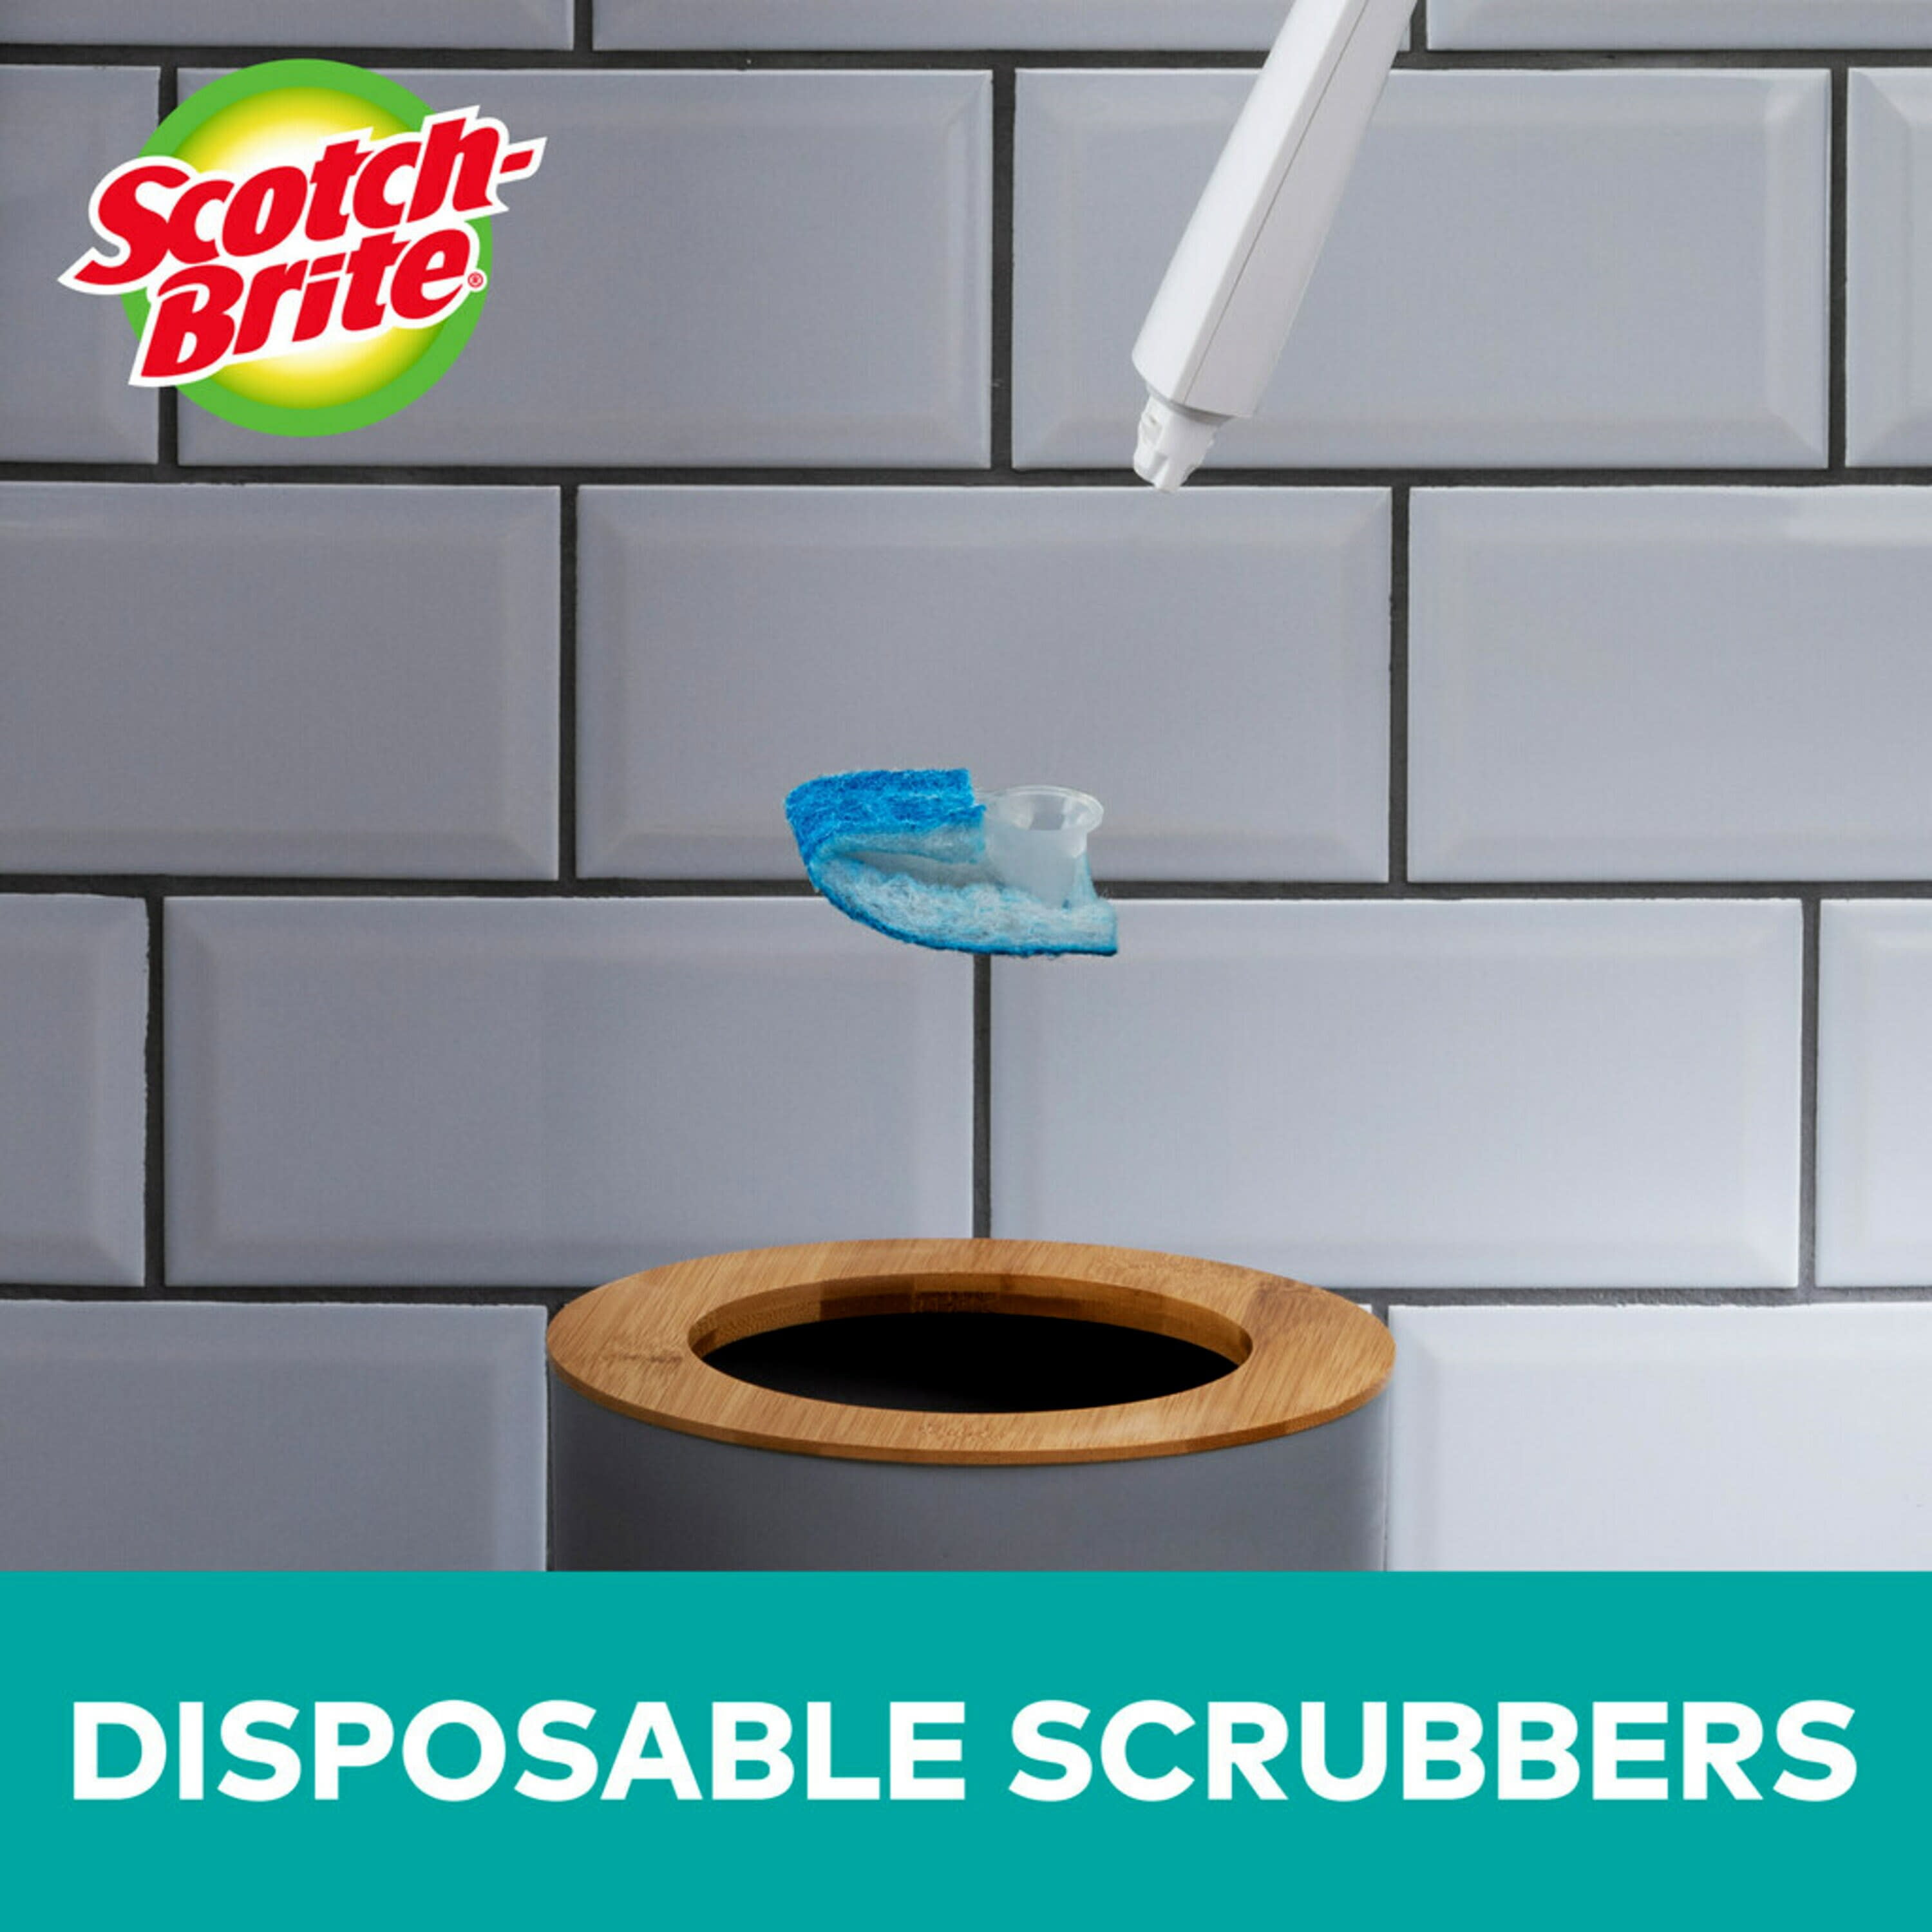 Scotch-Brite Disposable Toilet Scrubber Cleaning System, 1 Wand/ 5